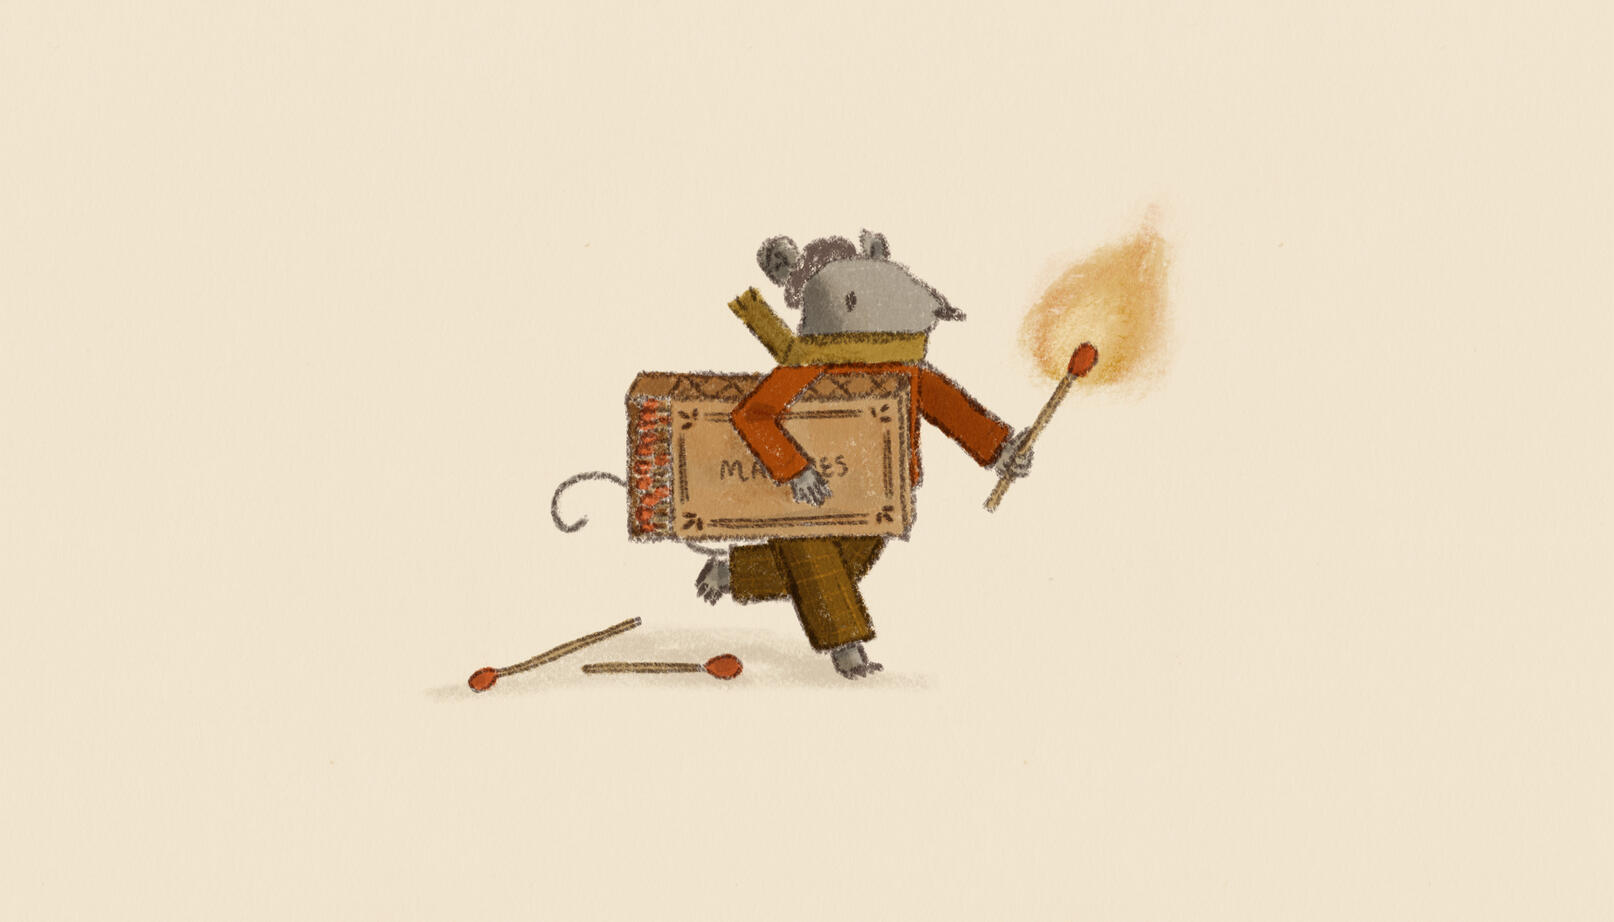 A rat wearing a beret and red sweater holding a match box and match that is lit on fire